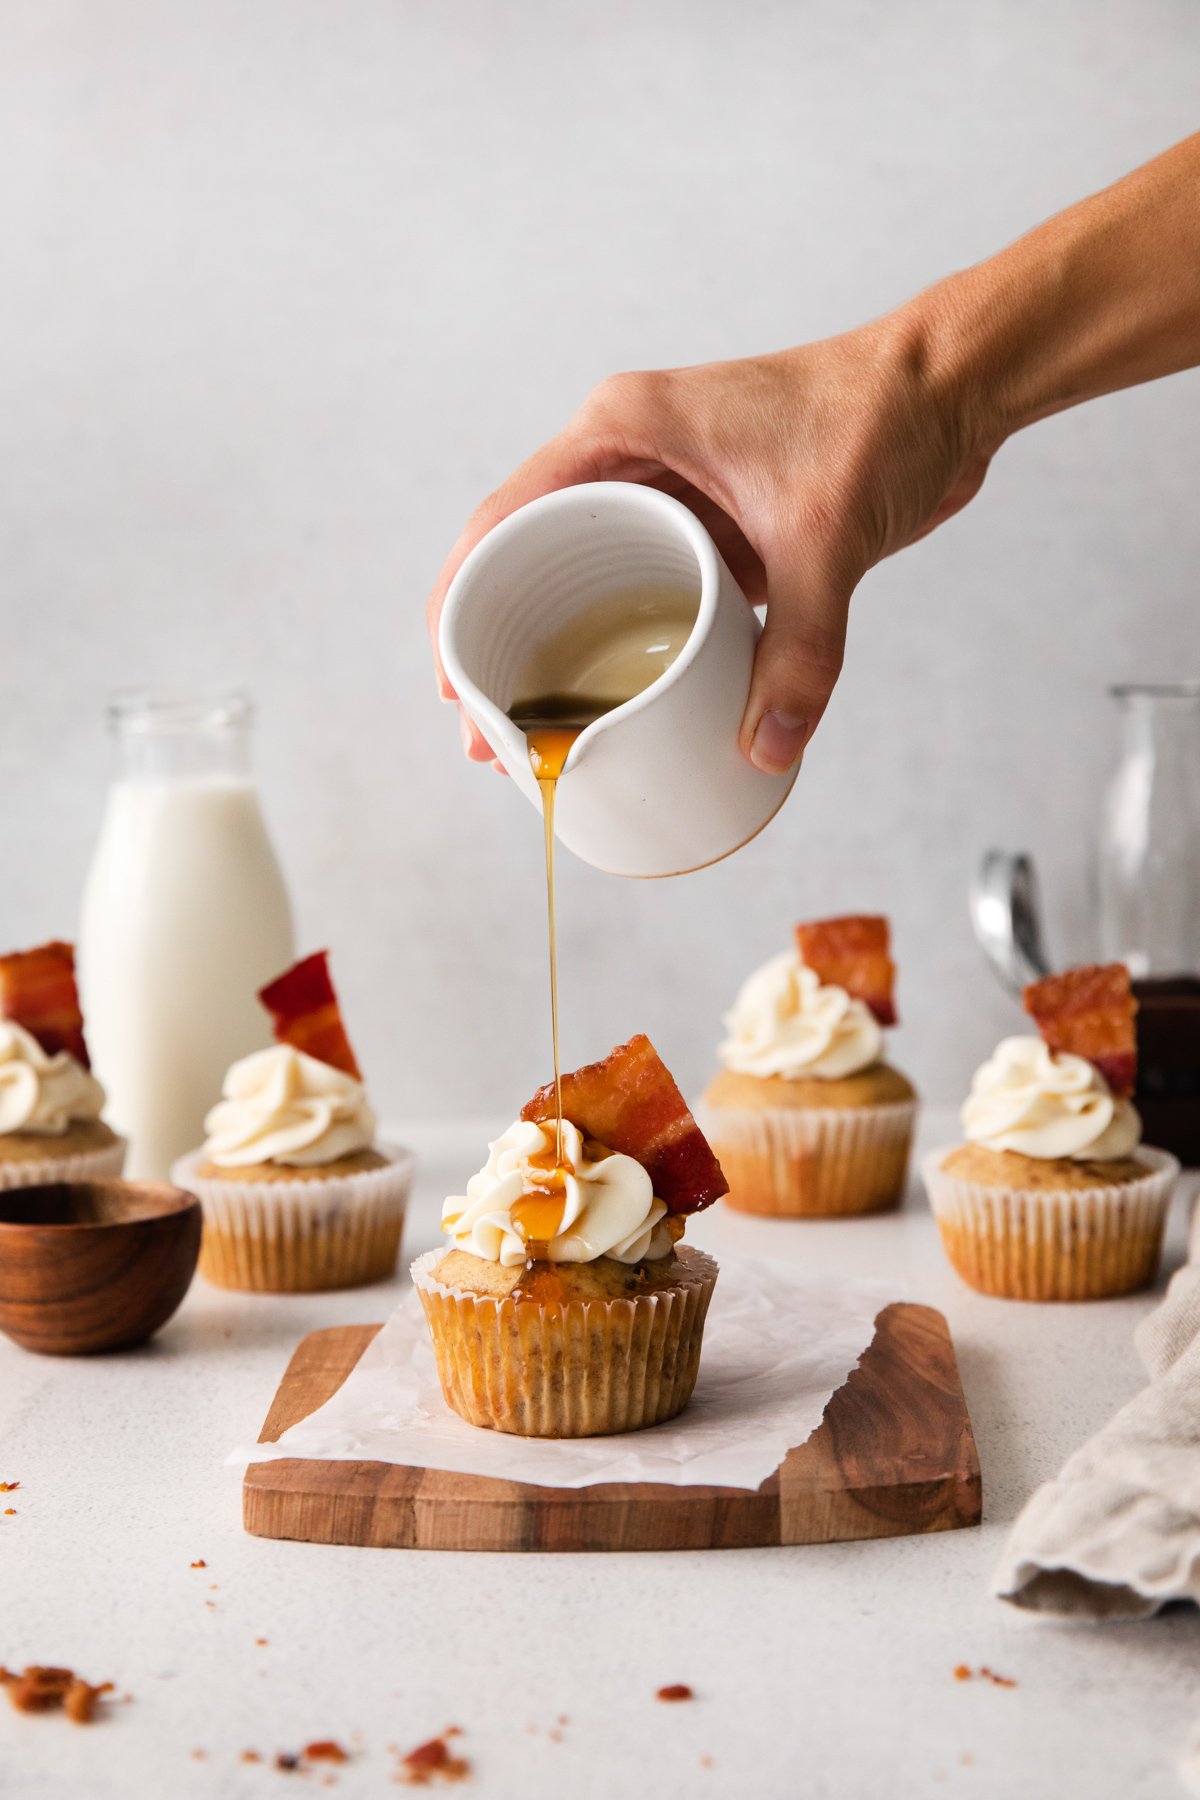 pouring syrup on top of a cupcake